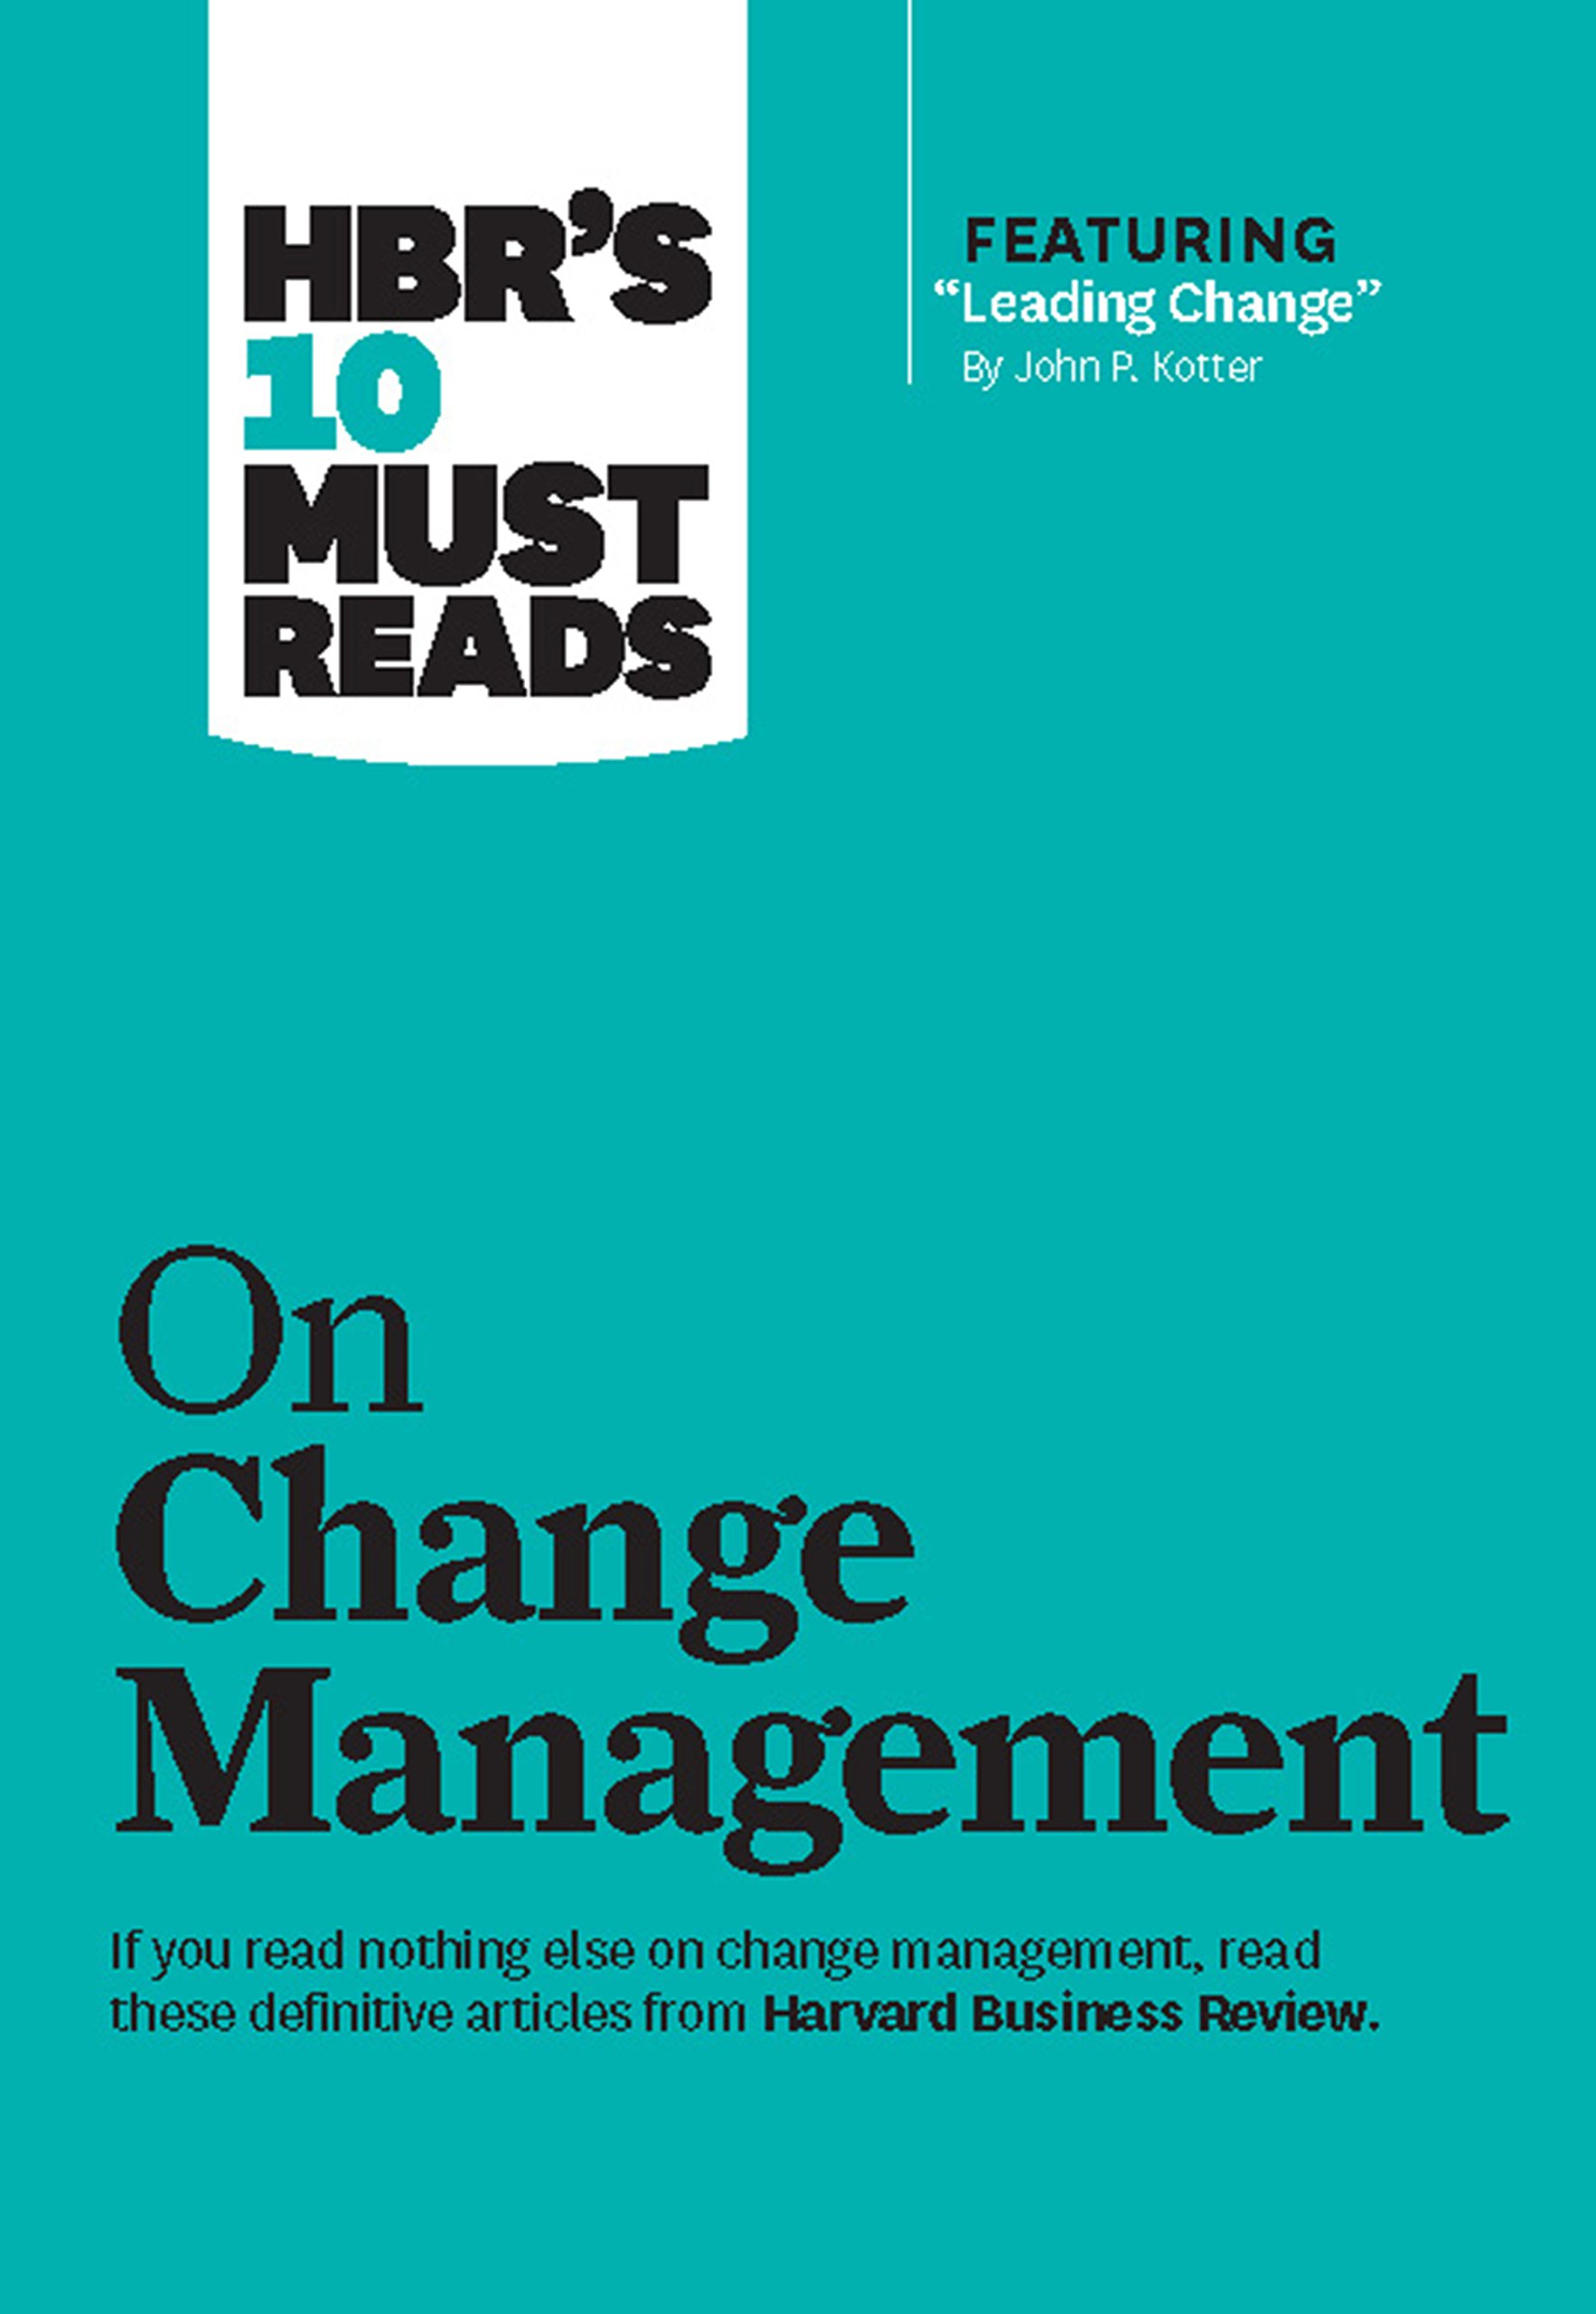 HBR&#039;s 10 Must Reads on Change Management